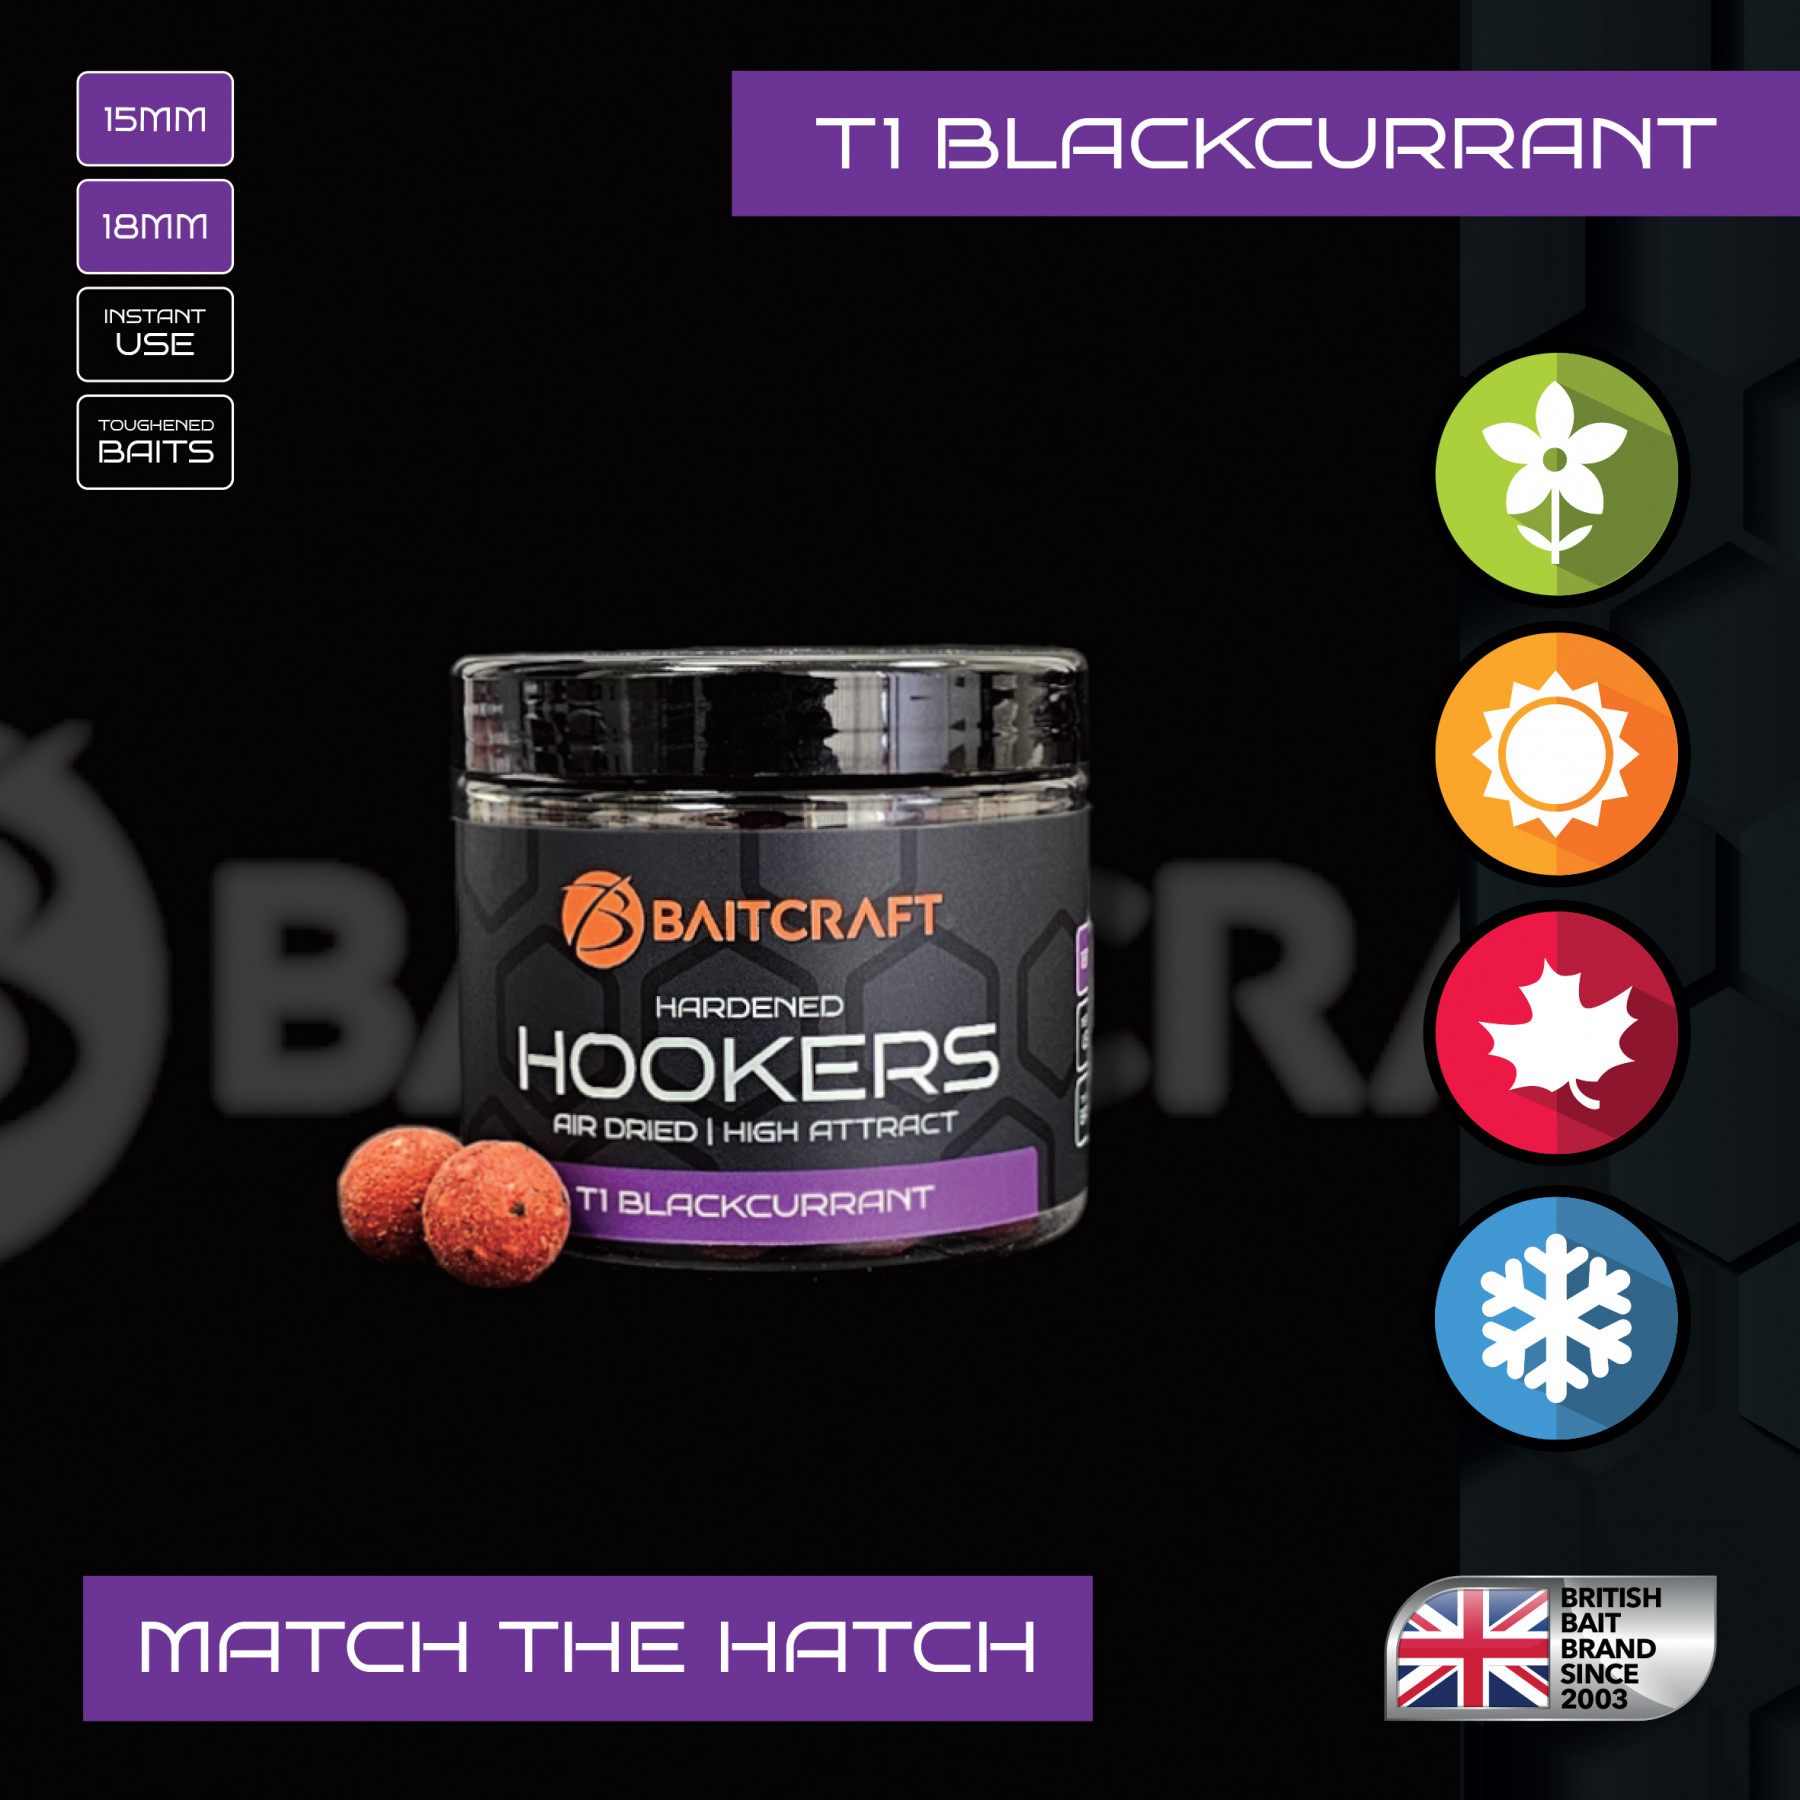 BAITCRAFT T1 BLACKCURRANT MATCH THE HATCH HARDENED HOOKERS